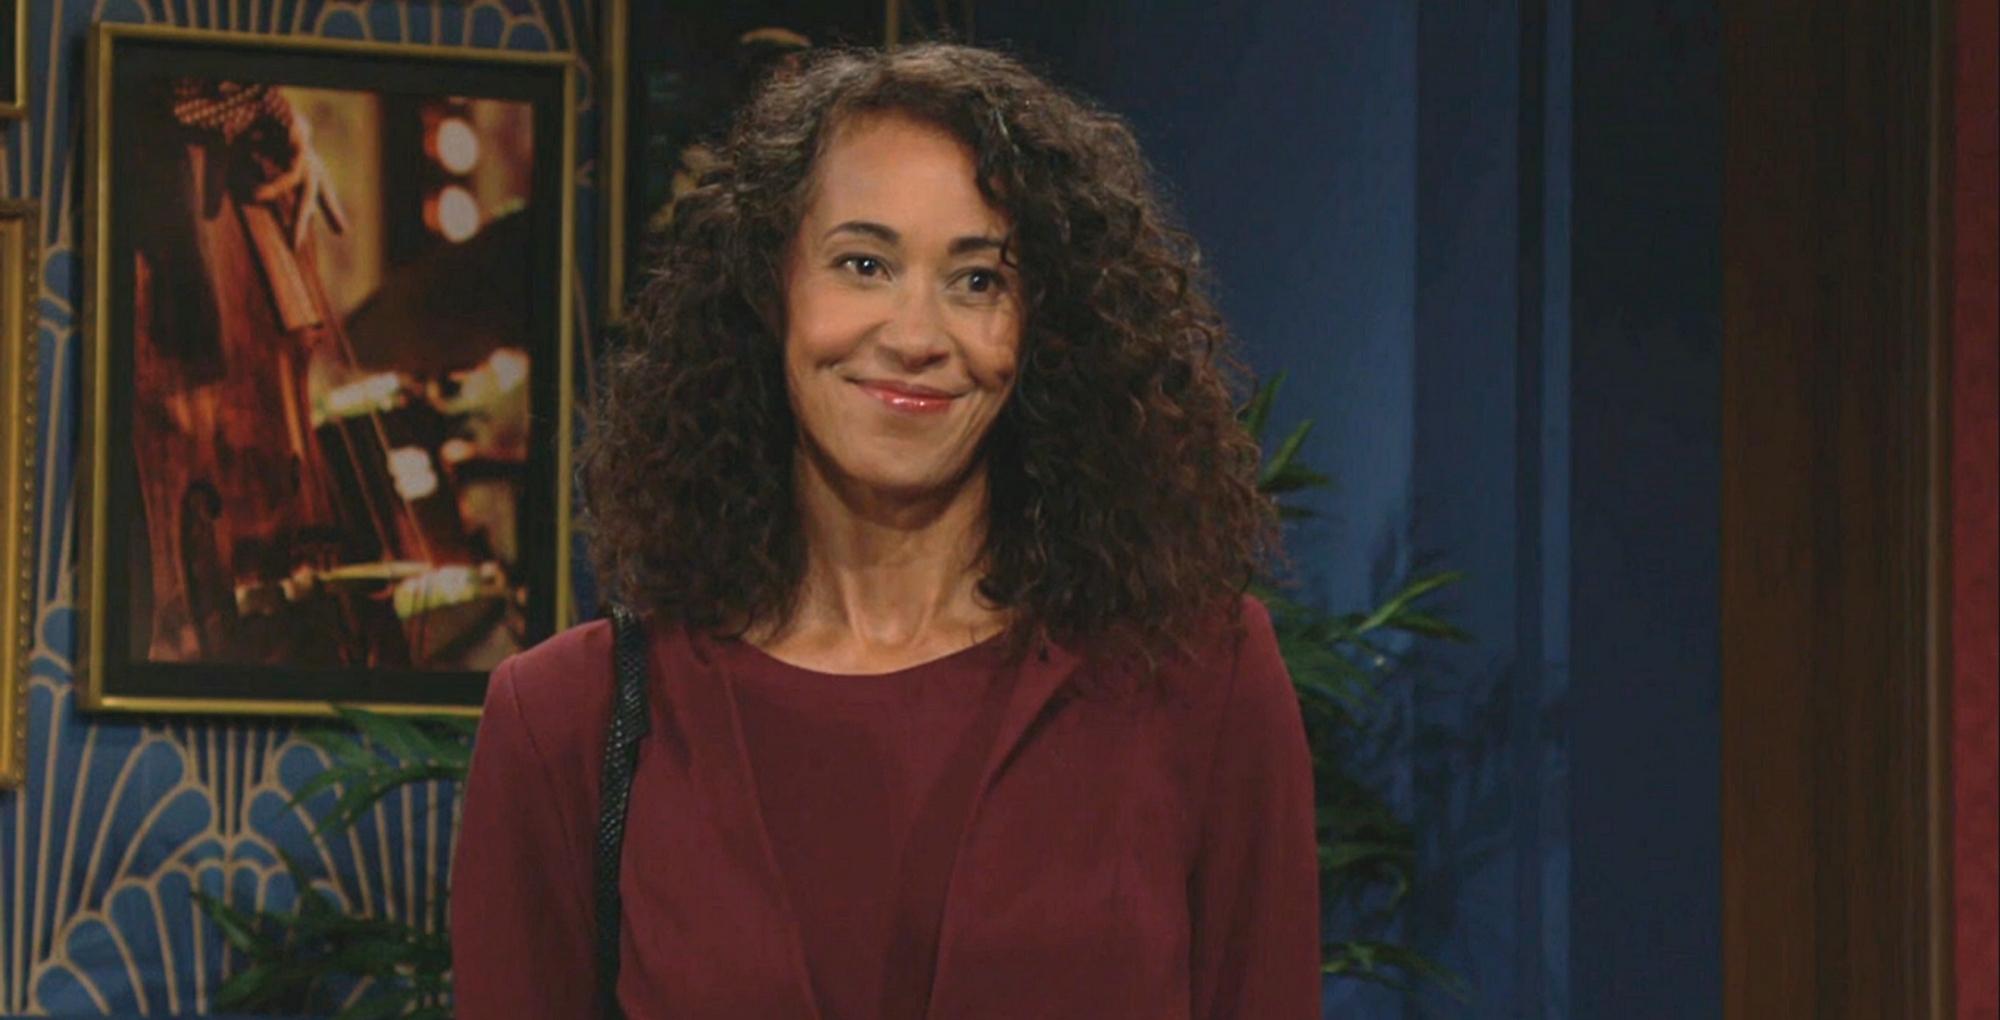 harmony hamilton returns to genoa city in young and the restless recap for may 5, 2023.